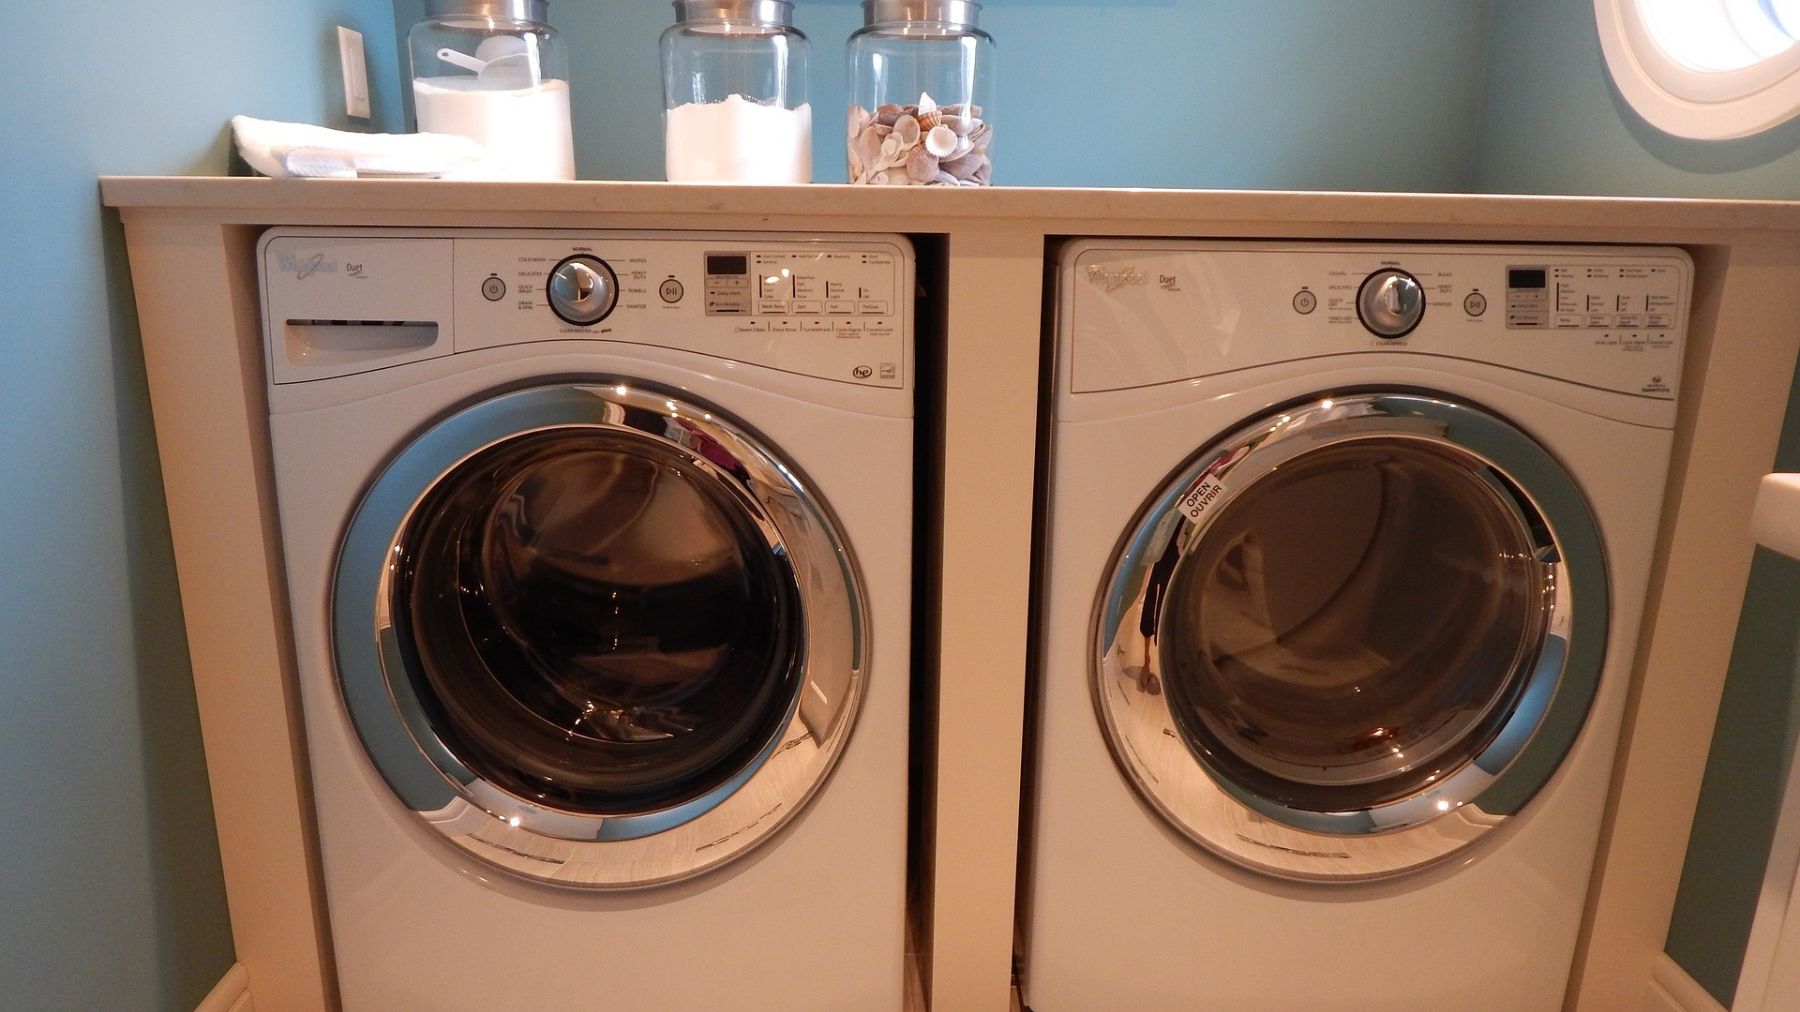 Washing machine: how to always keep it clean and efficient